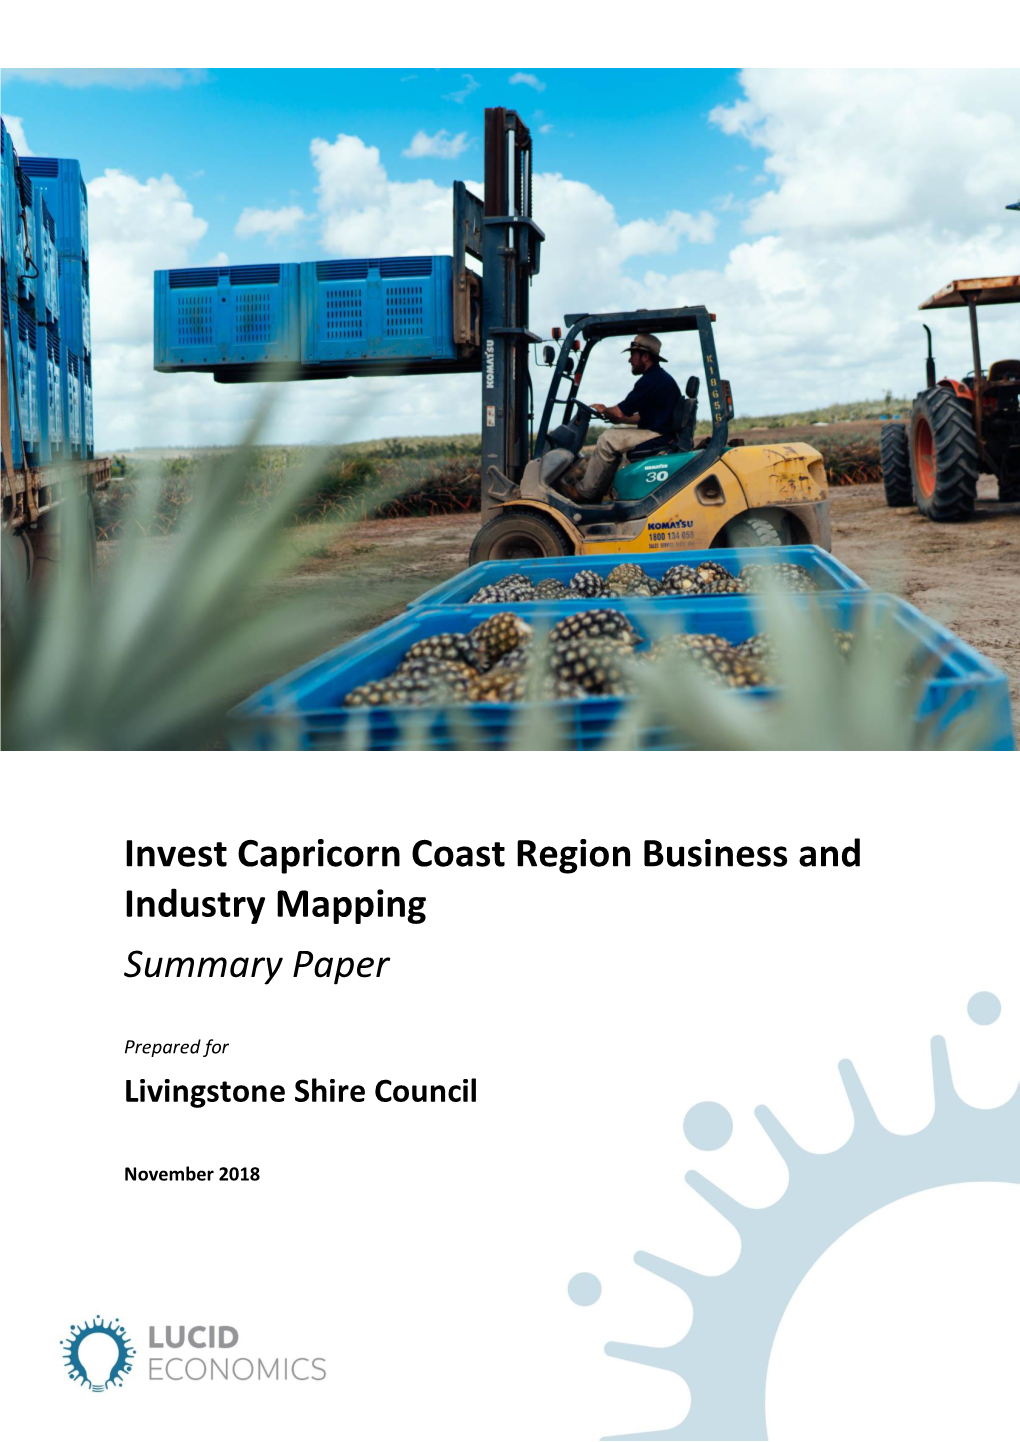 Invest Capricorn Coast Business and Industry Mapping